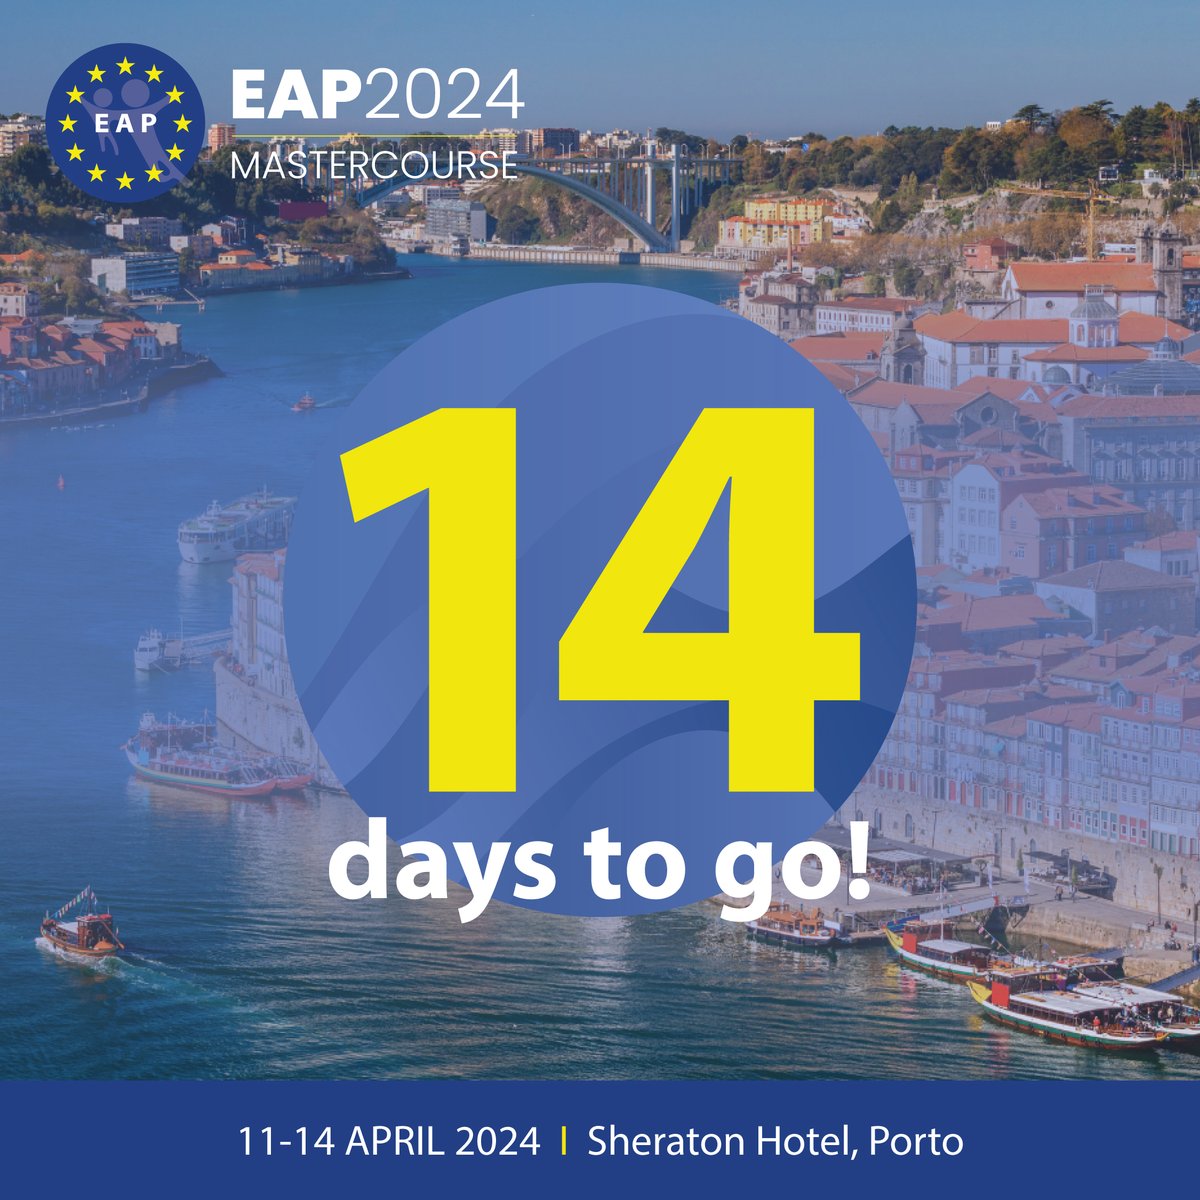 Only 14 days left until the EAP 2024 Mastercourse kicks off! 🌟 Get ready to immerse yourself in the latest paediatric breakthroughs, connect with experts, and elevate your practice. The excitement is building – are you ready? loom.ly/qHAPyGY